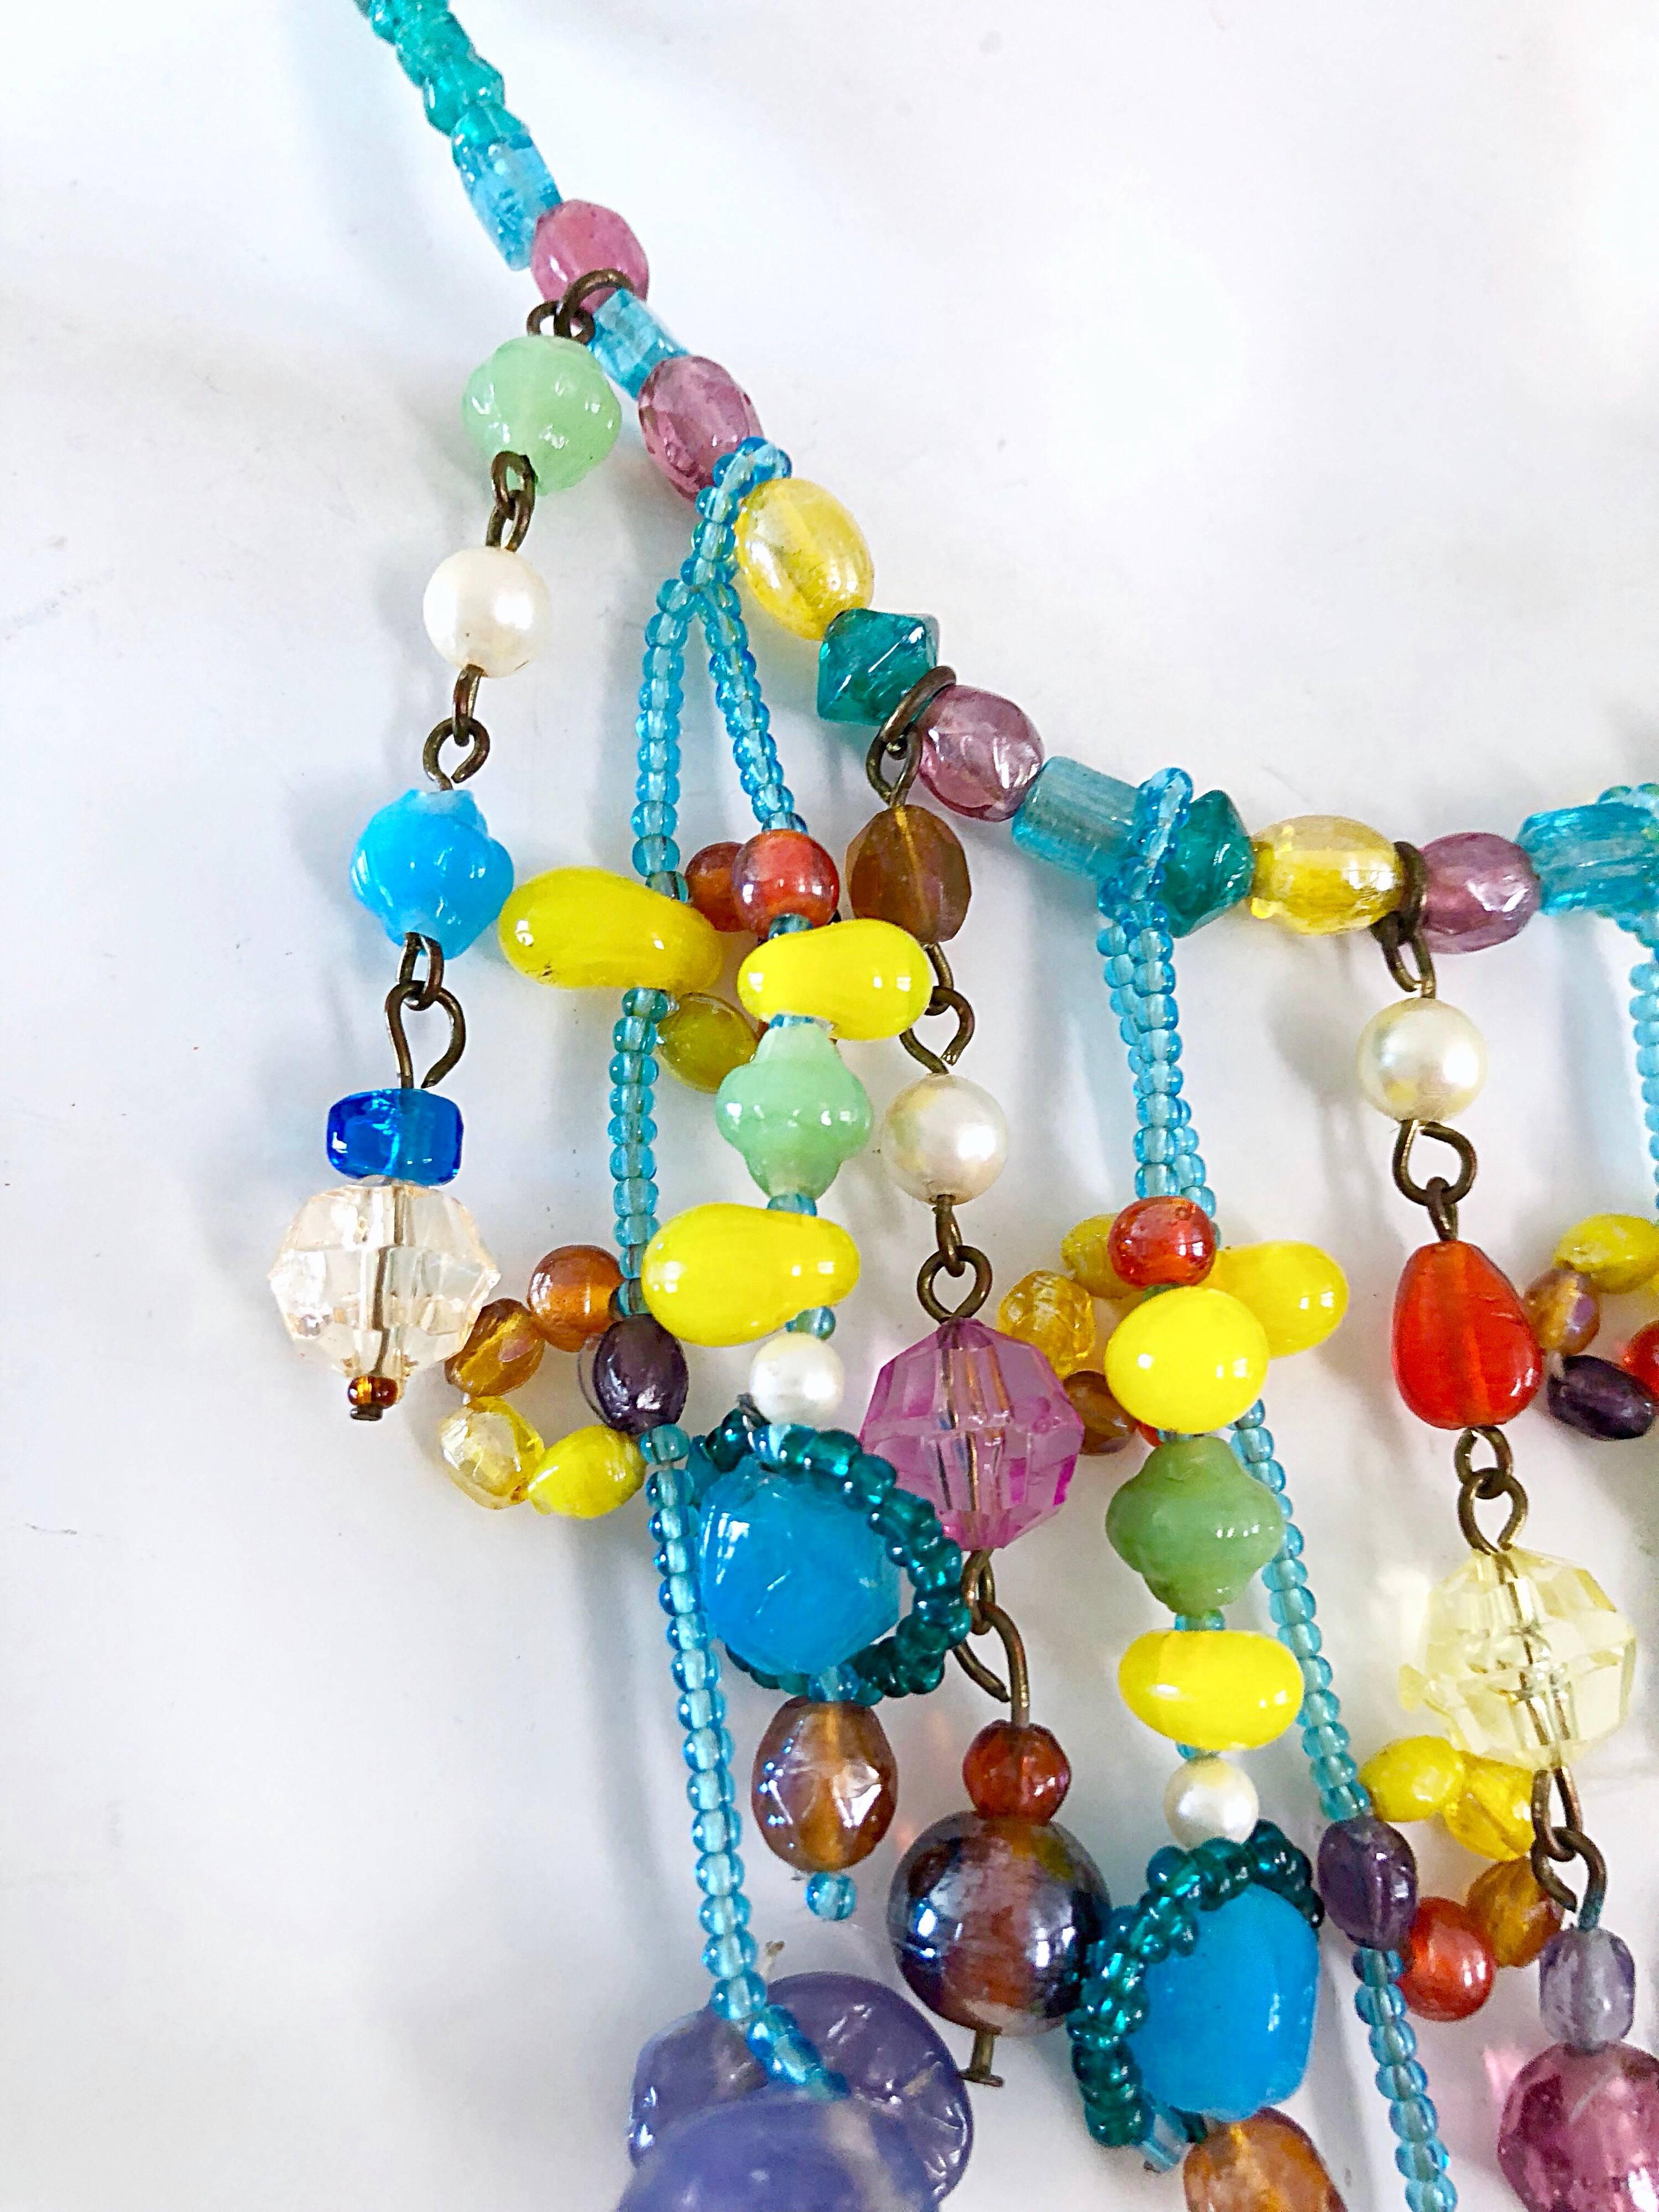 Rare early 80s MARC LABAT muto colored fruit salad style necklace choker. Features blue, yellow, purple, blue, turquoise, red and orange beads, stones and pearls throughout. Adjustable length can be worn multiple lengths